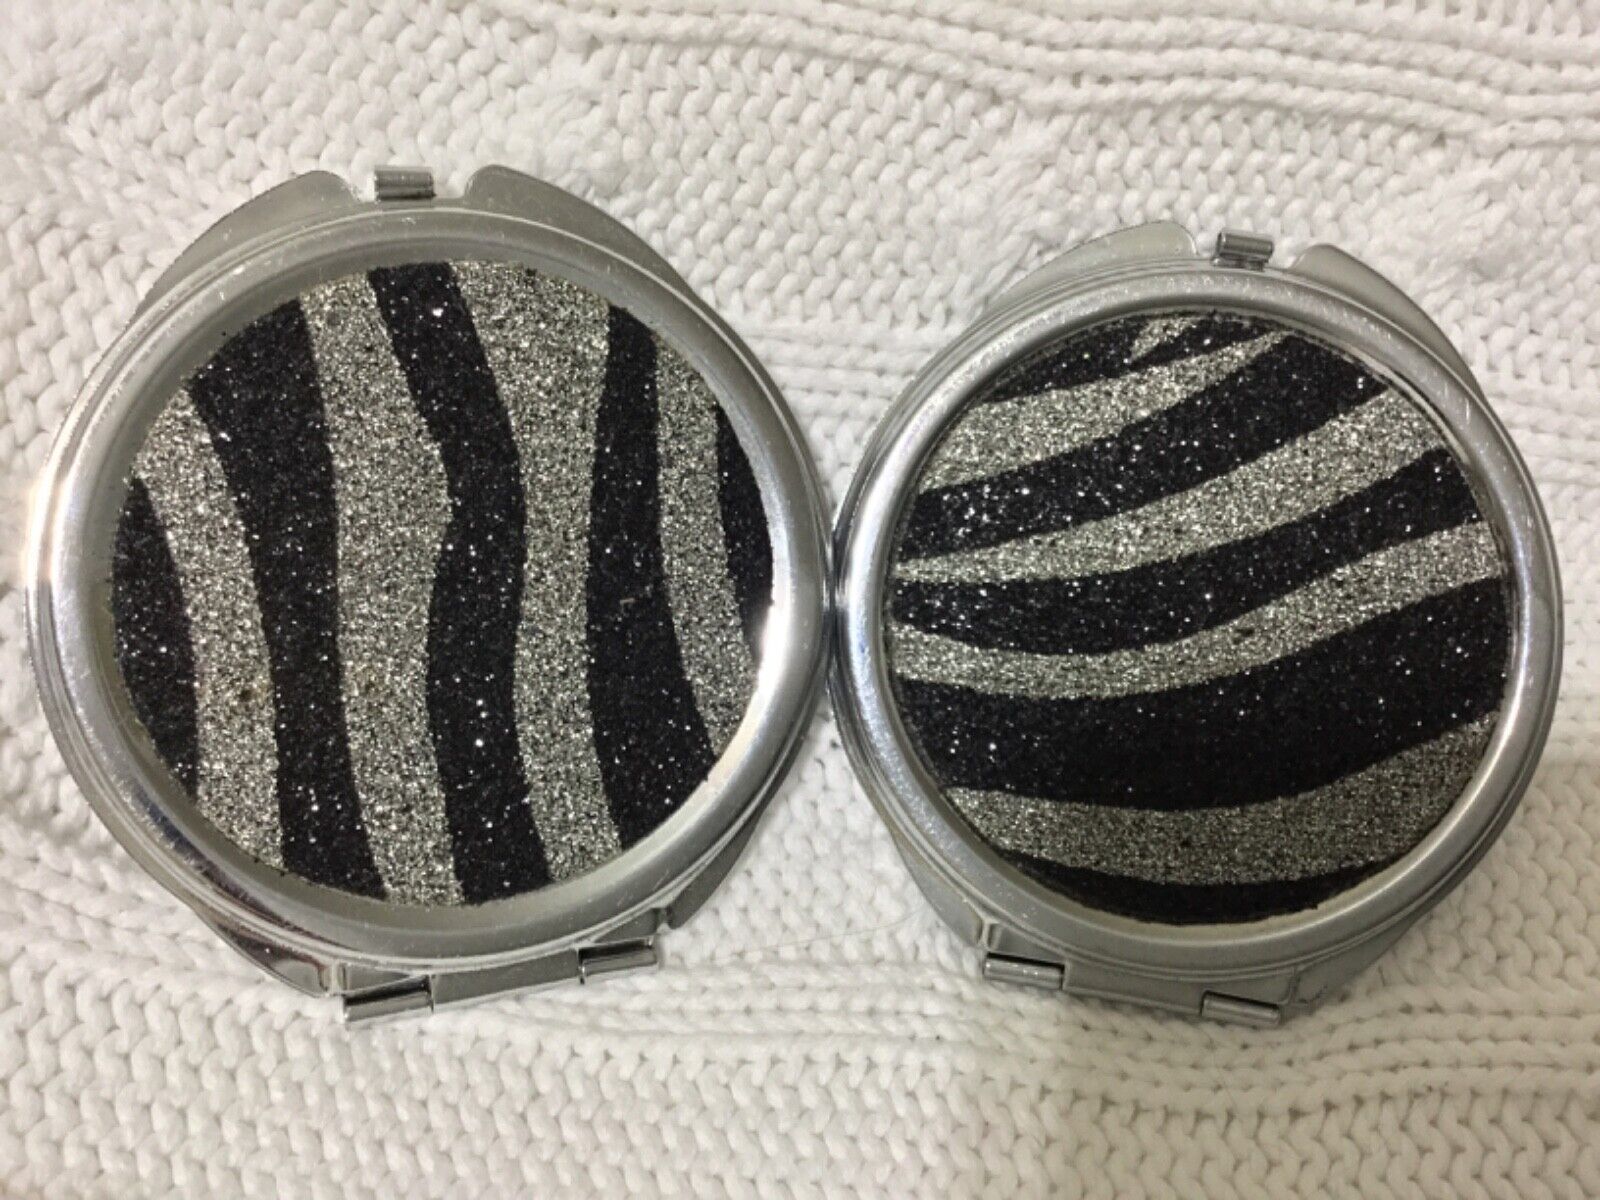 TWO WELFORTH FINE PEWTER ENAMEL ZEBRA PATTERN MIRRORED COMPACT(2.25”X 2.25”) WELFORTH